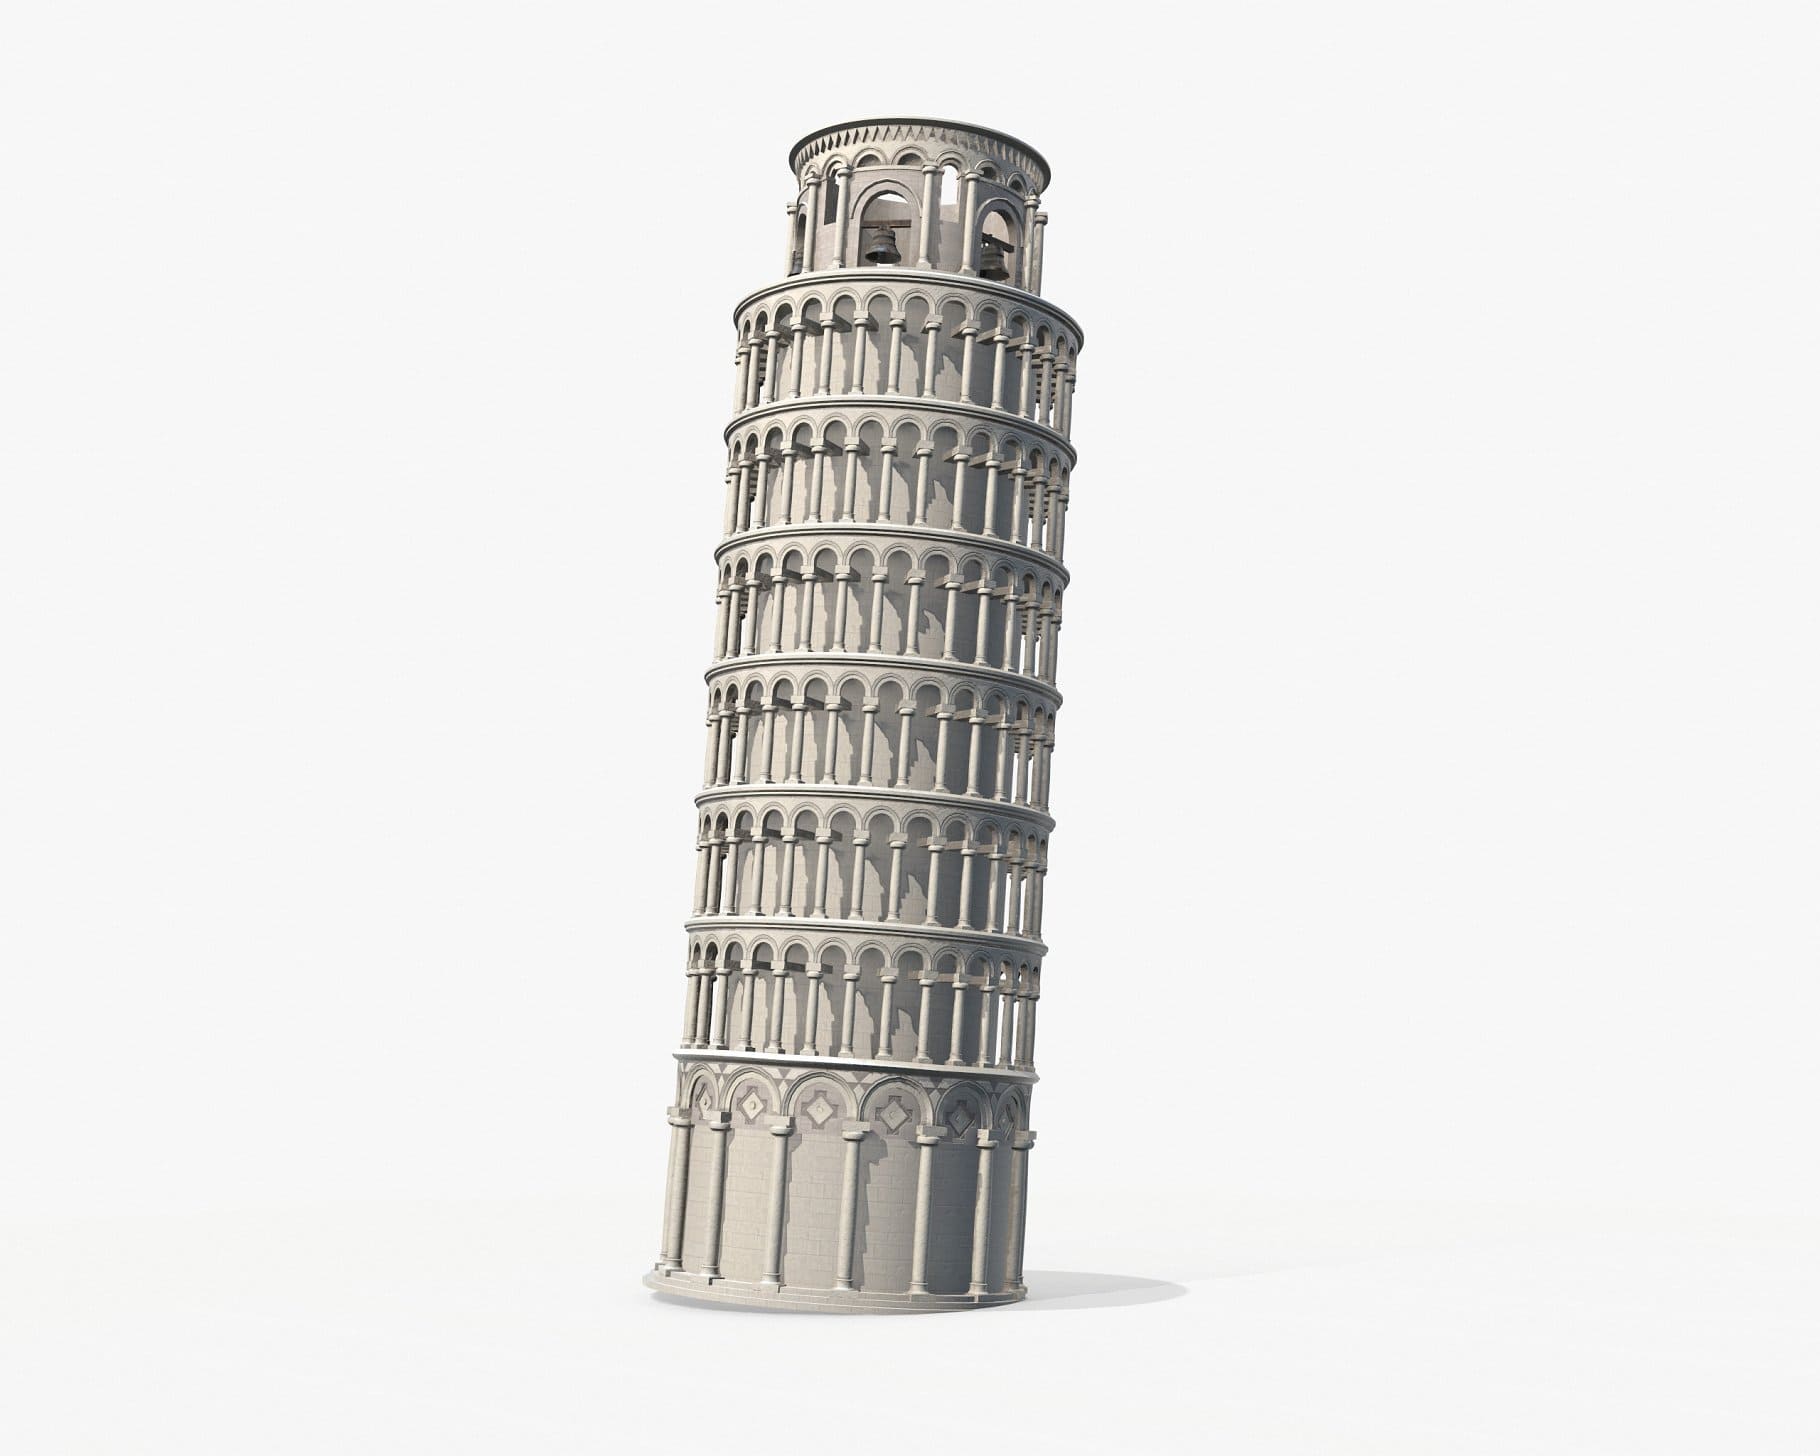 3D model of the Leaning Tower of Pisa.